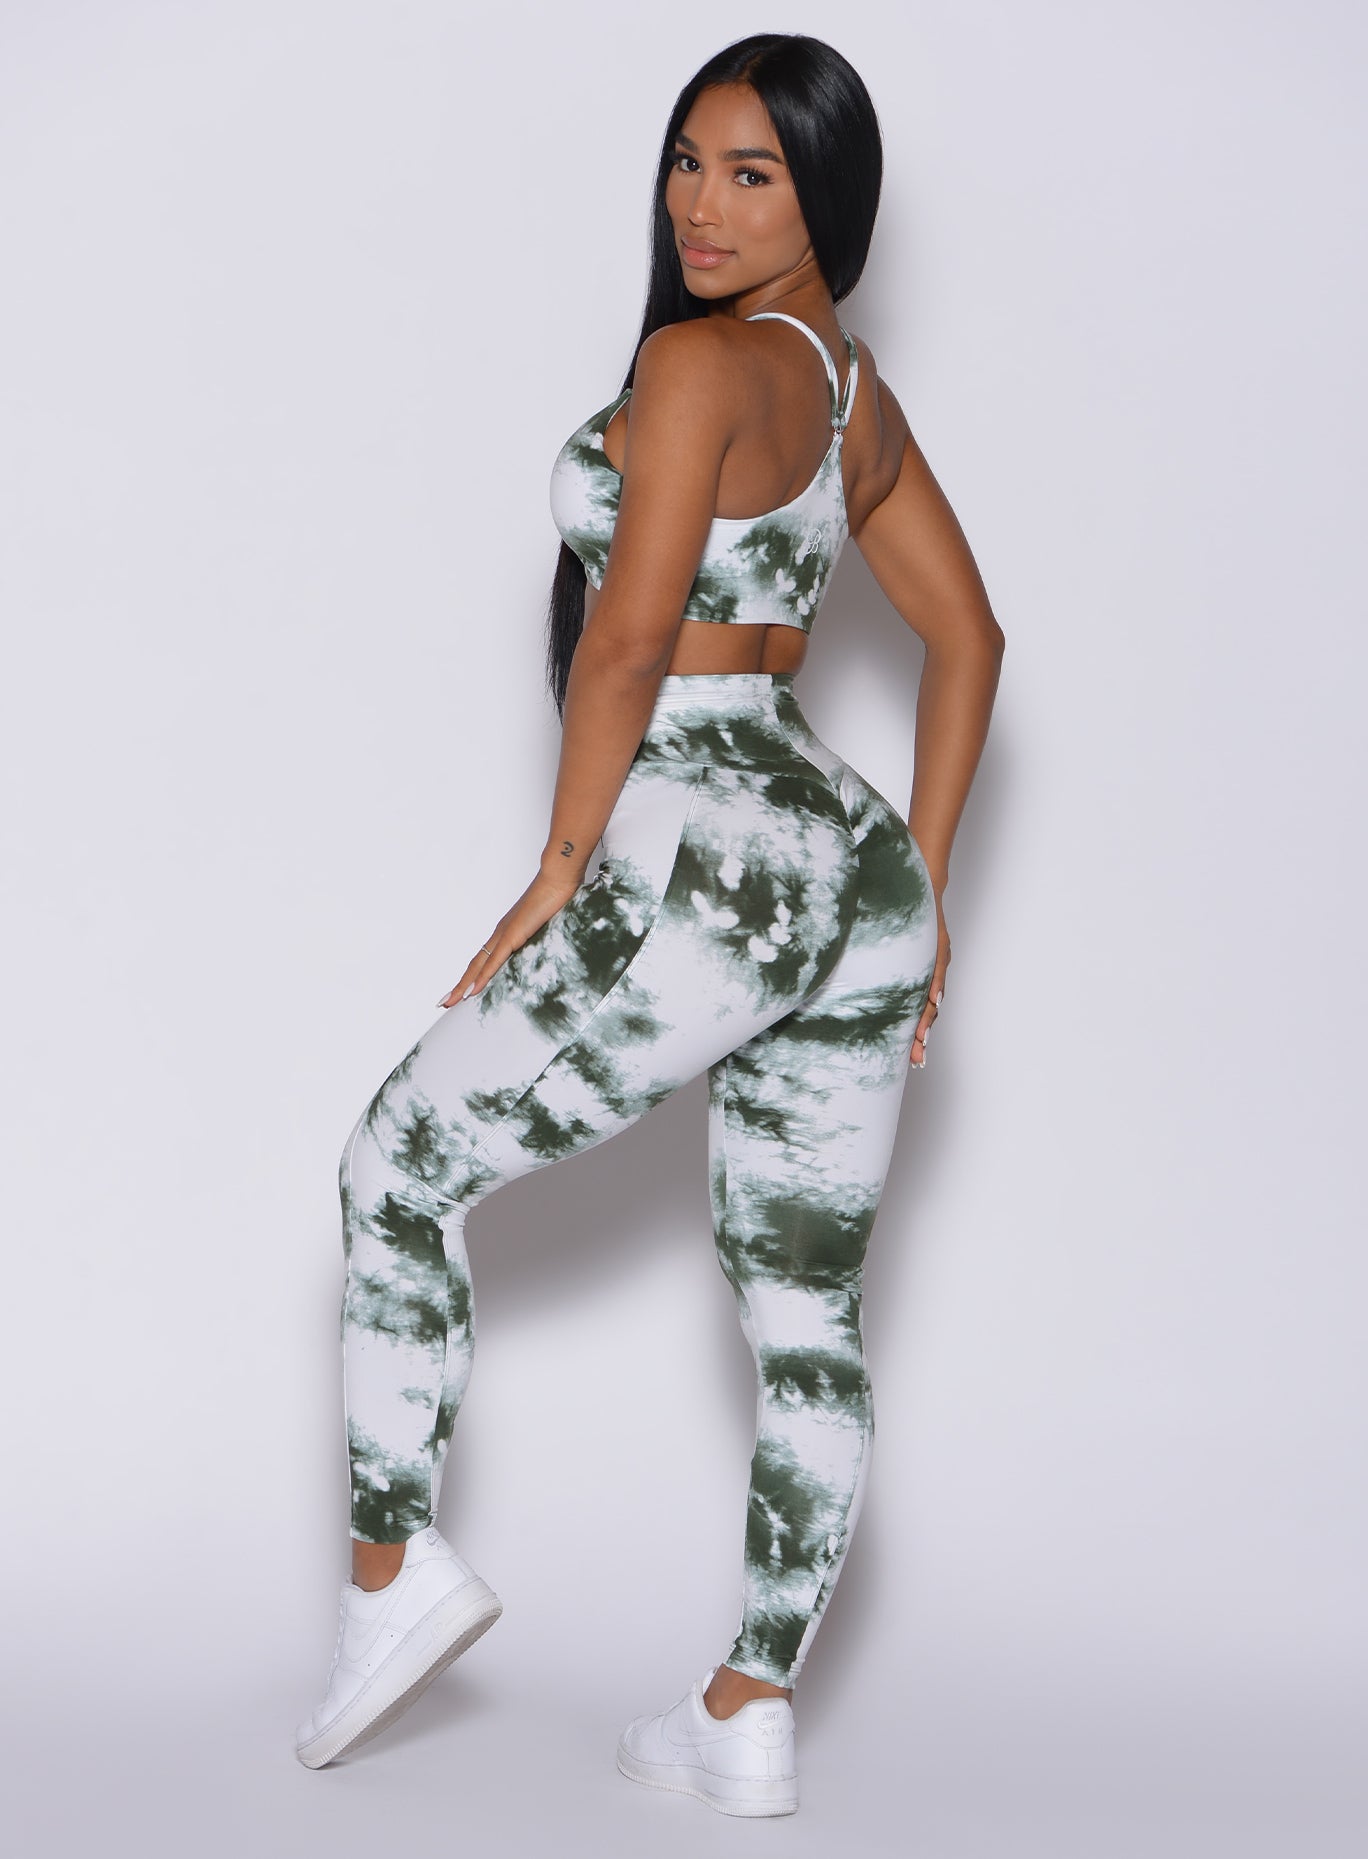 Left side profile view of a model facing to her left wearing our tie dye peach booty leggings in green white and a matching bra